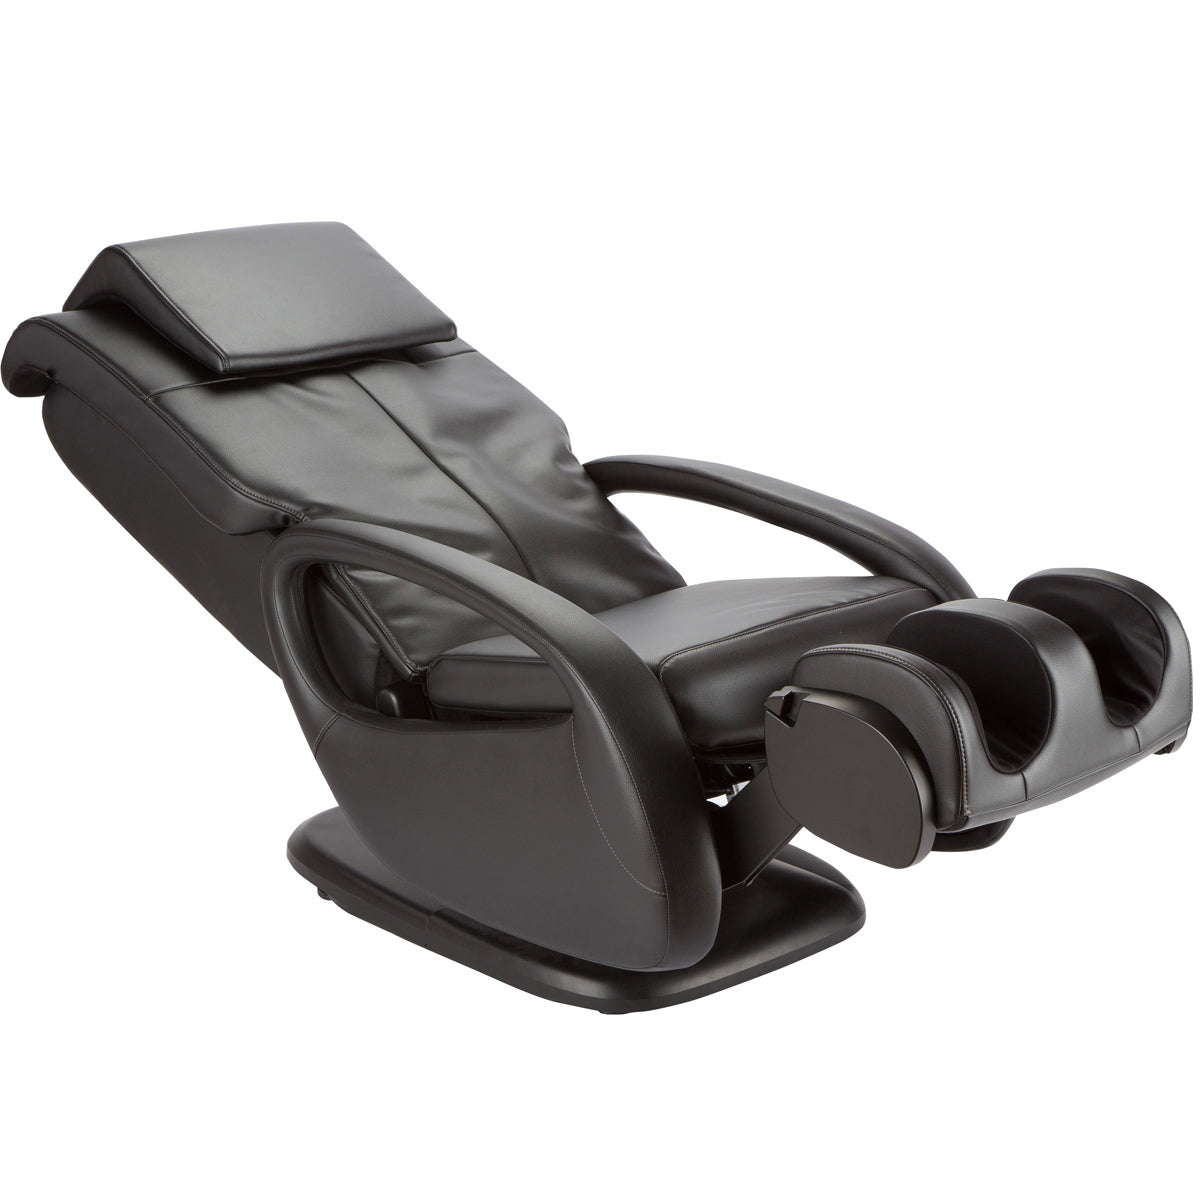 Human Touch WholeBody 5.1 Massage Chair Massage Chair Human Touch   